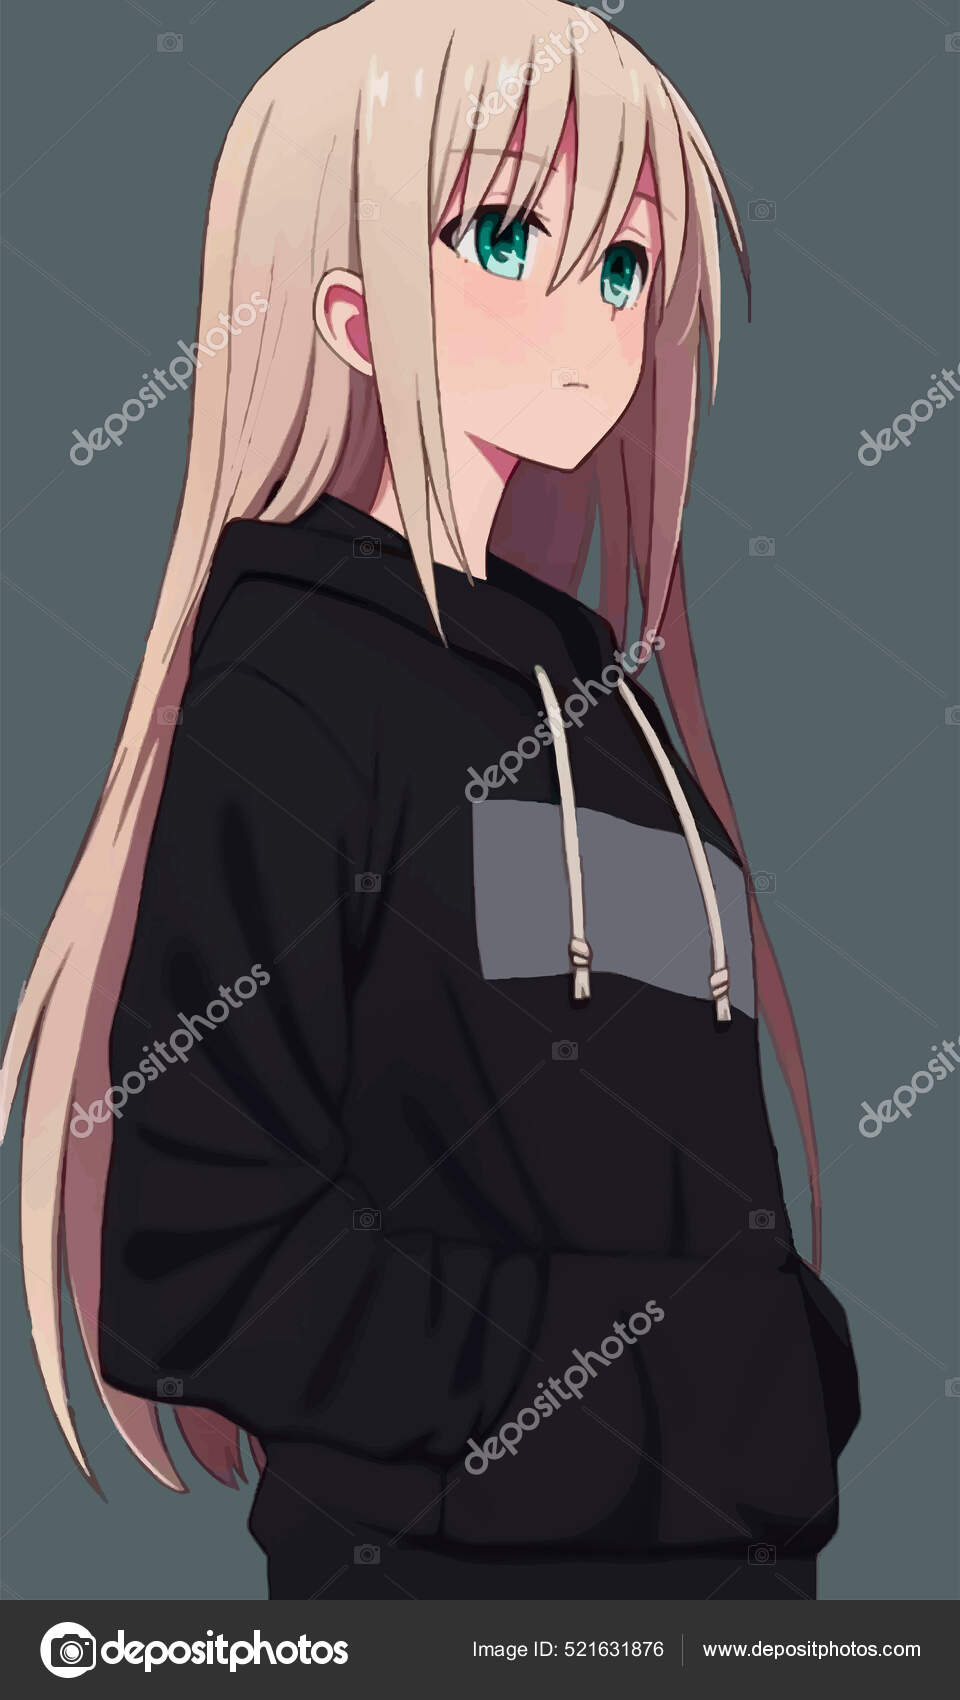 Anime Girl with a Bow in Her Hair Stock Vector - Illustration of